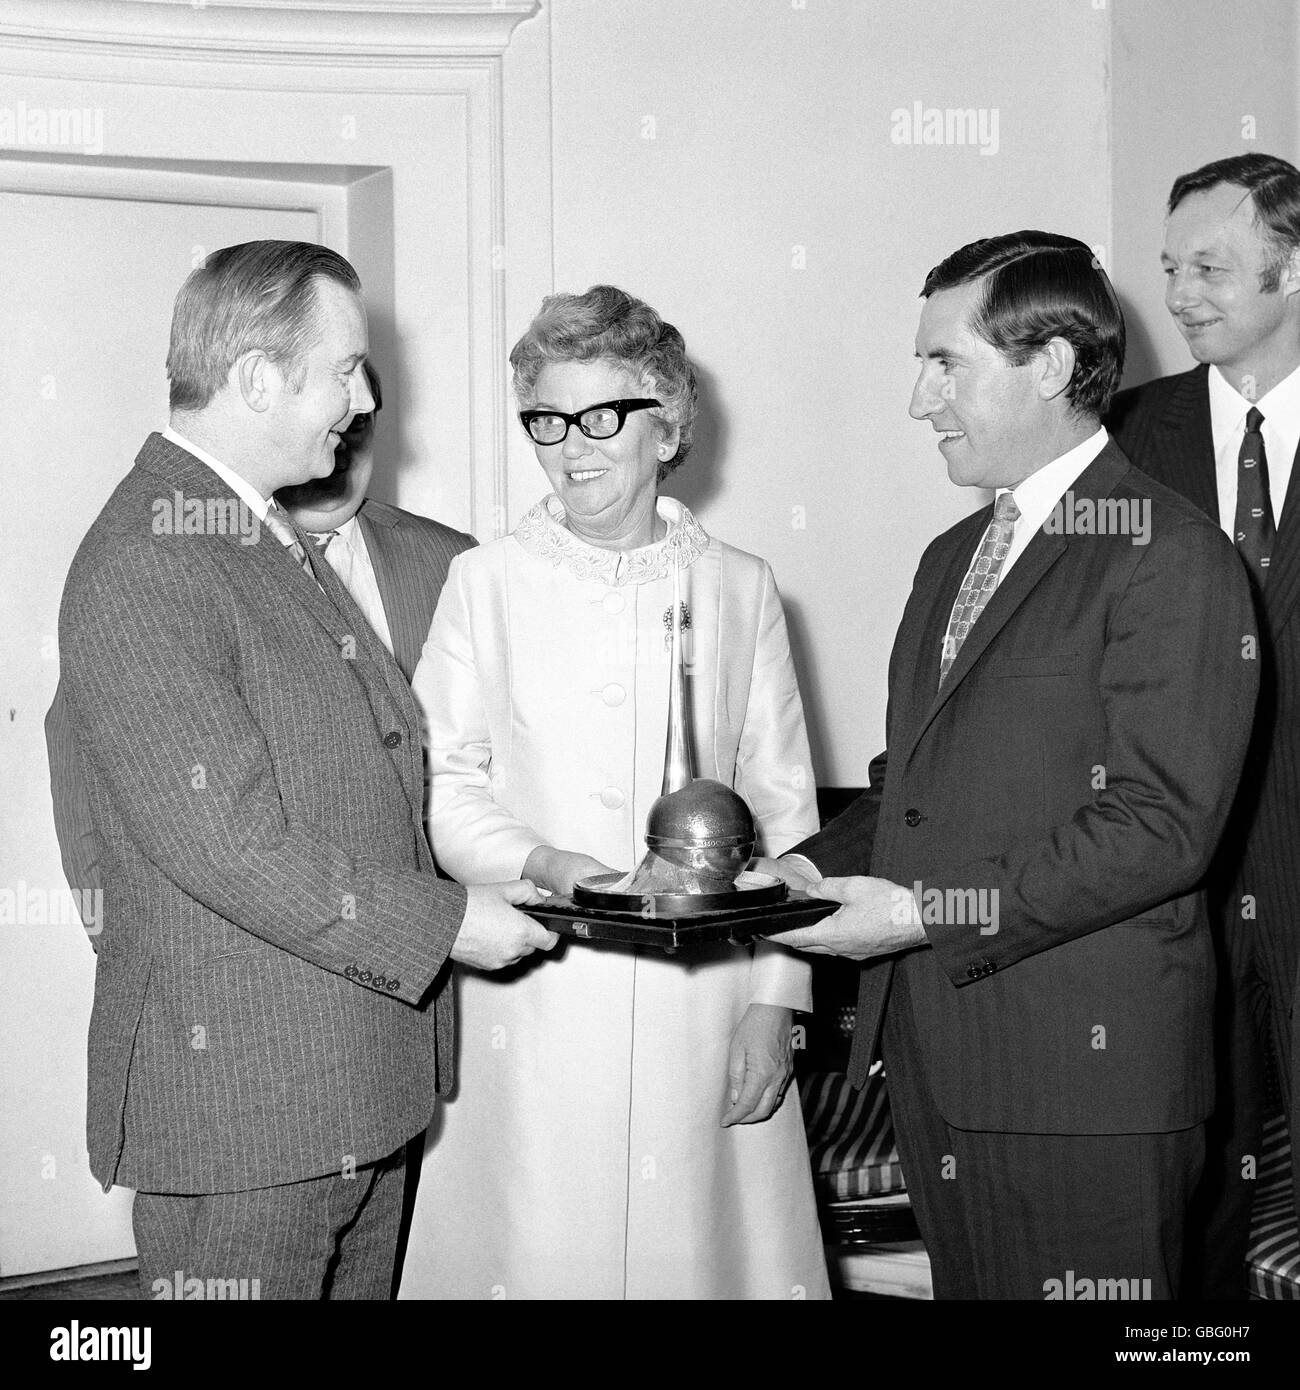 Mary Whitehouse, 'Clean Up TV' campaigner, and her National Viewers and Listeners Association, paying tribute to the BBC. She is seen in the centre as Bryan Cowgill, left, head of BBC Sports, received from Frank O'Farrell, manager of Manchester United, the annual TV award by the association. It was awarded to the BBC for its sports programmes. Stock Photo